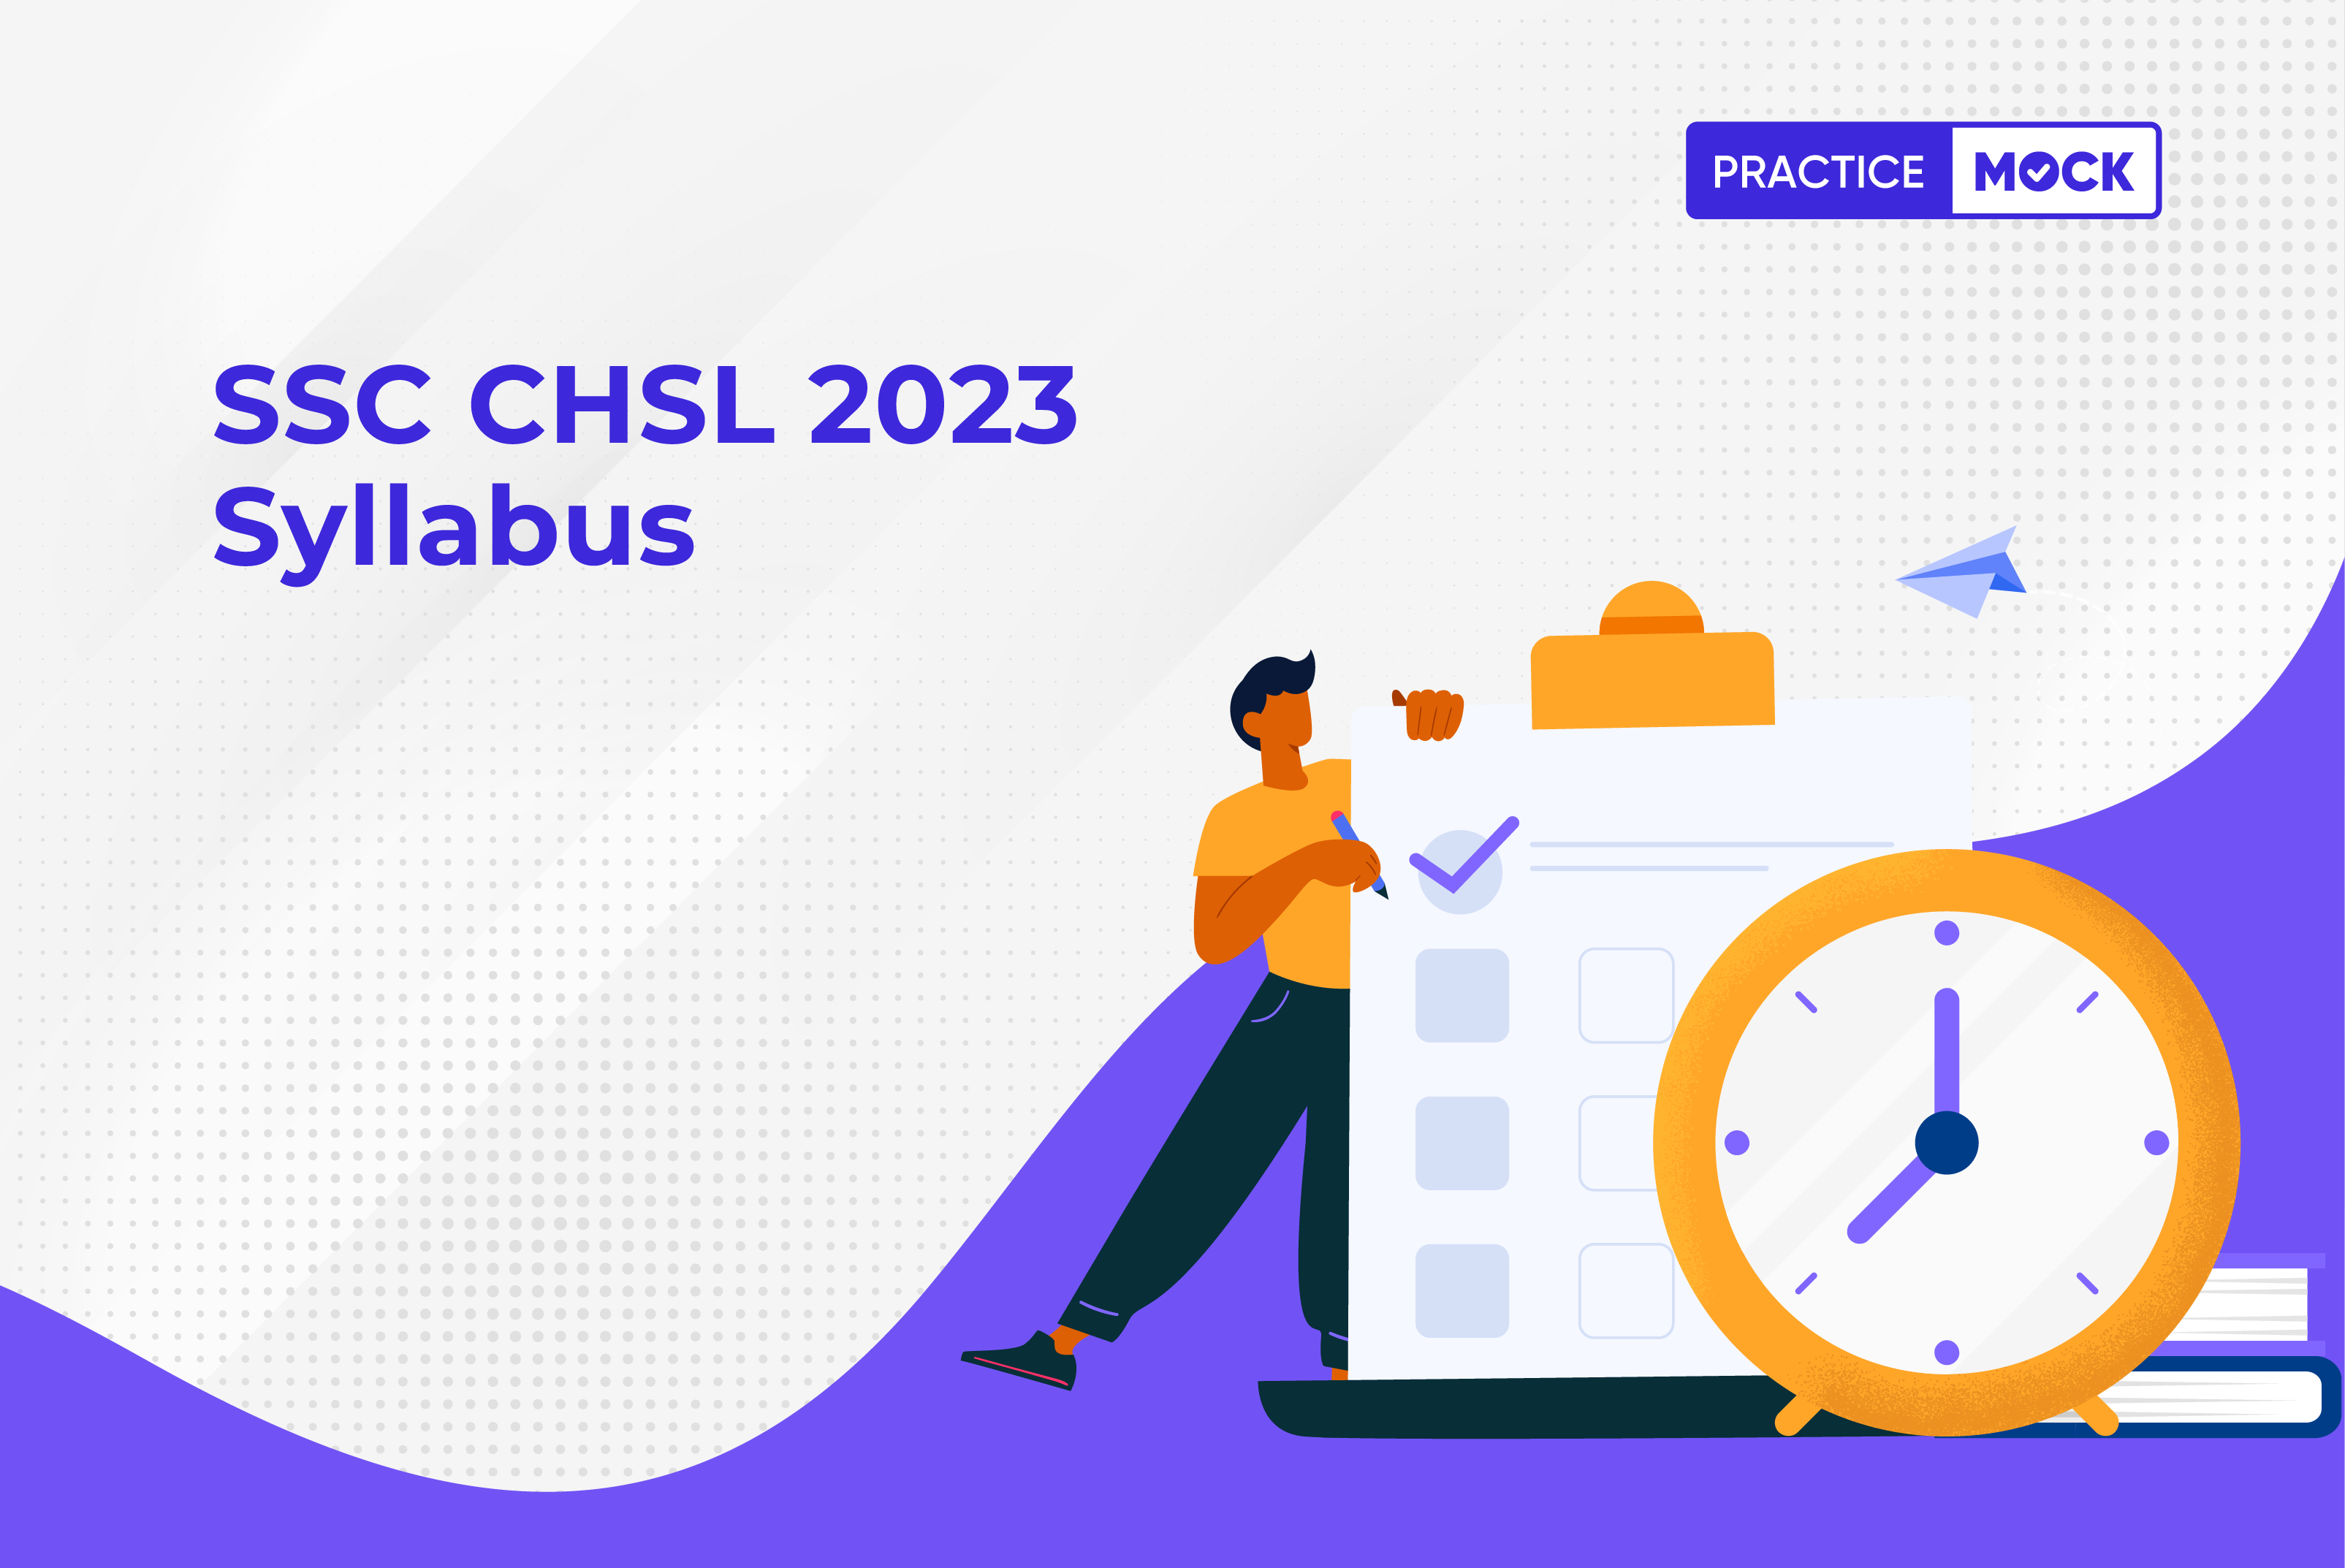 SSC CHSL 2023 Syllabus-Best Mock Tests to Cover Every Topic